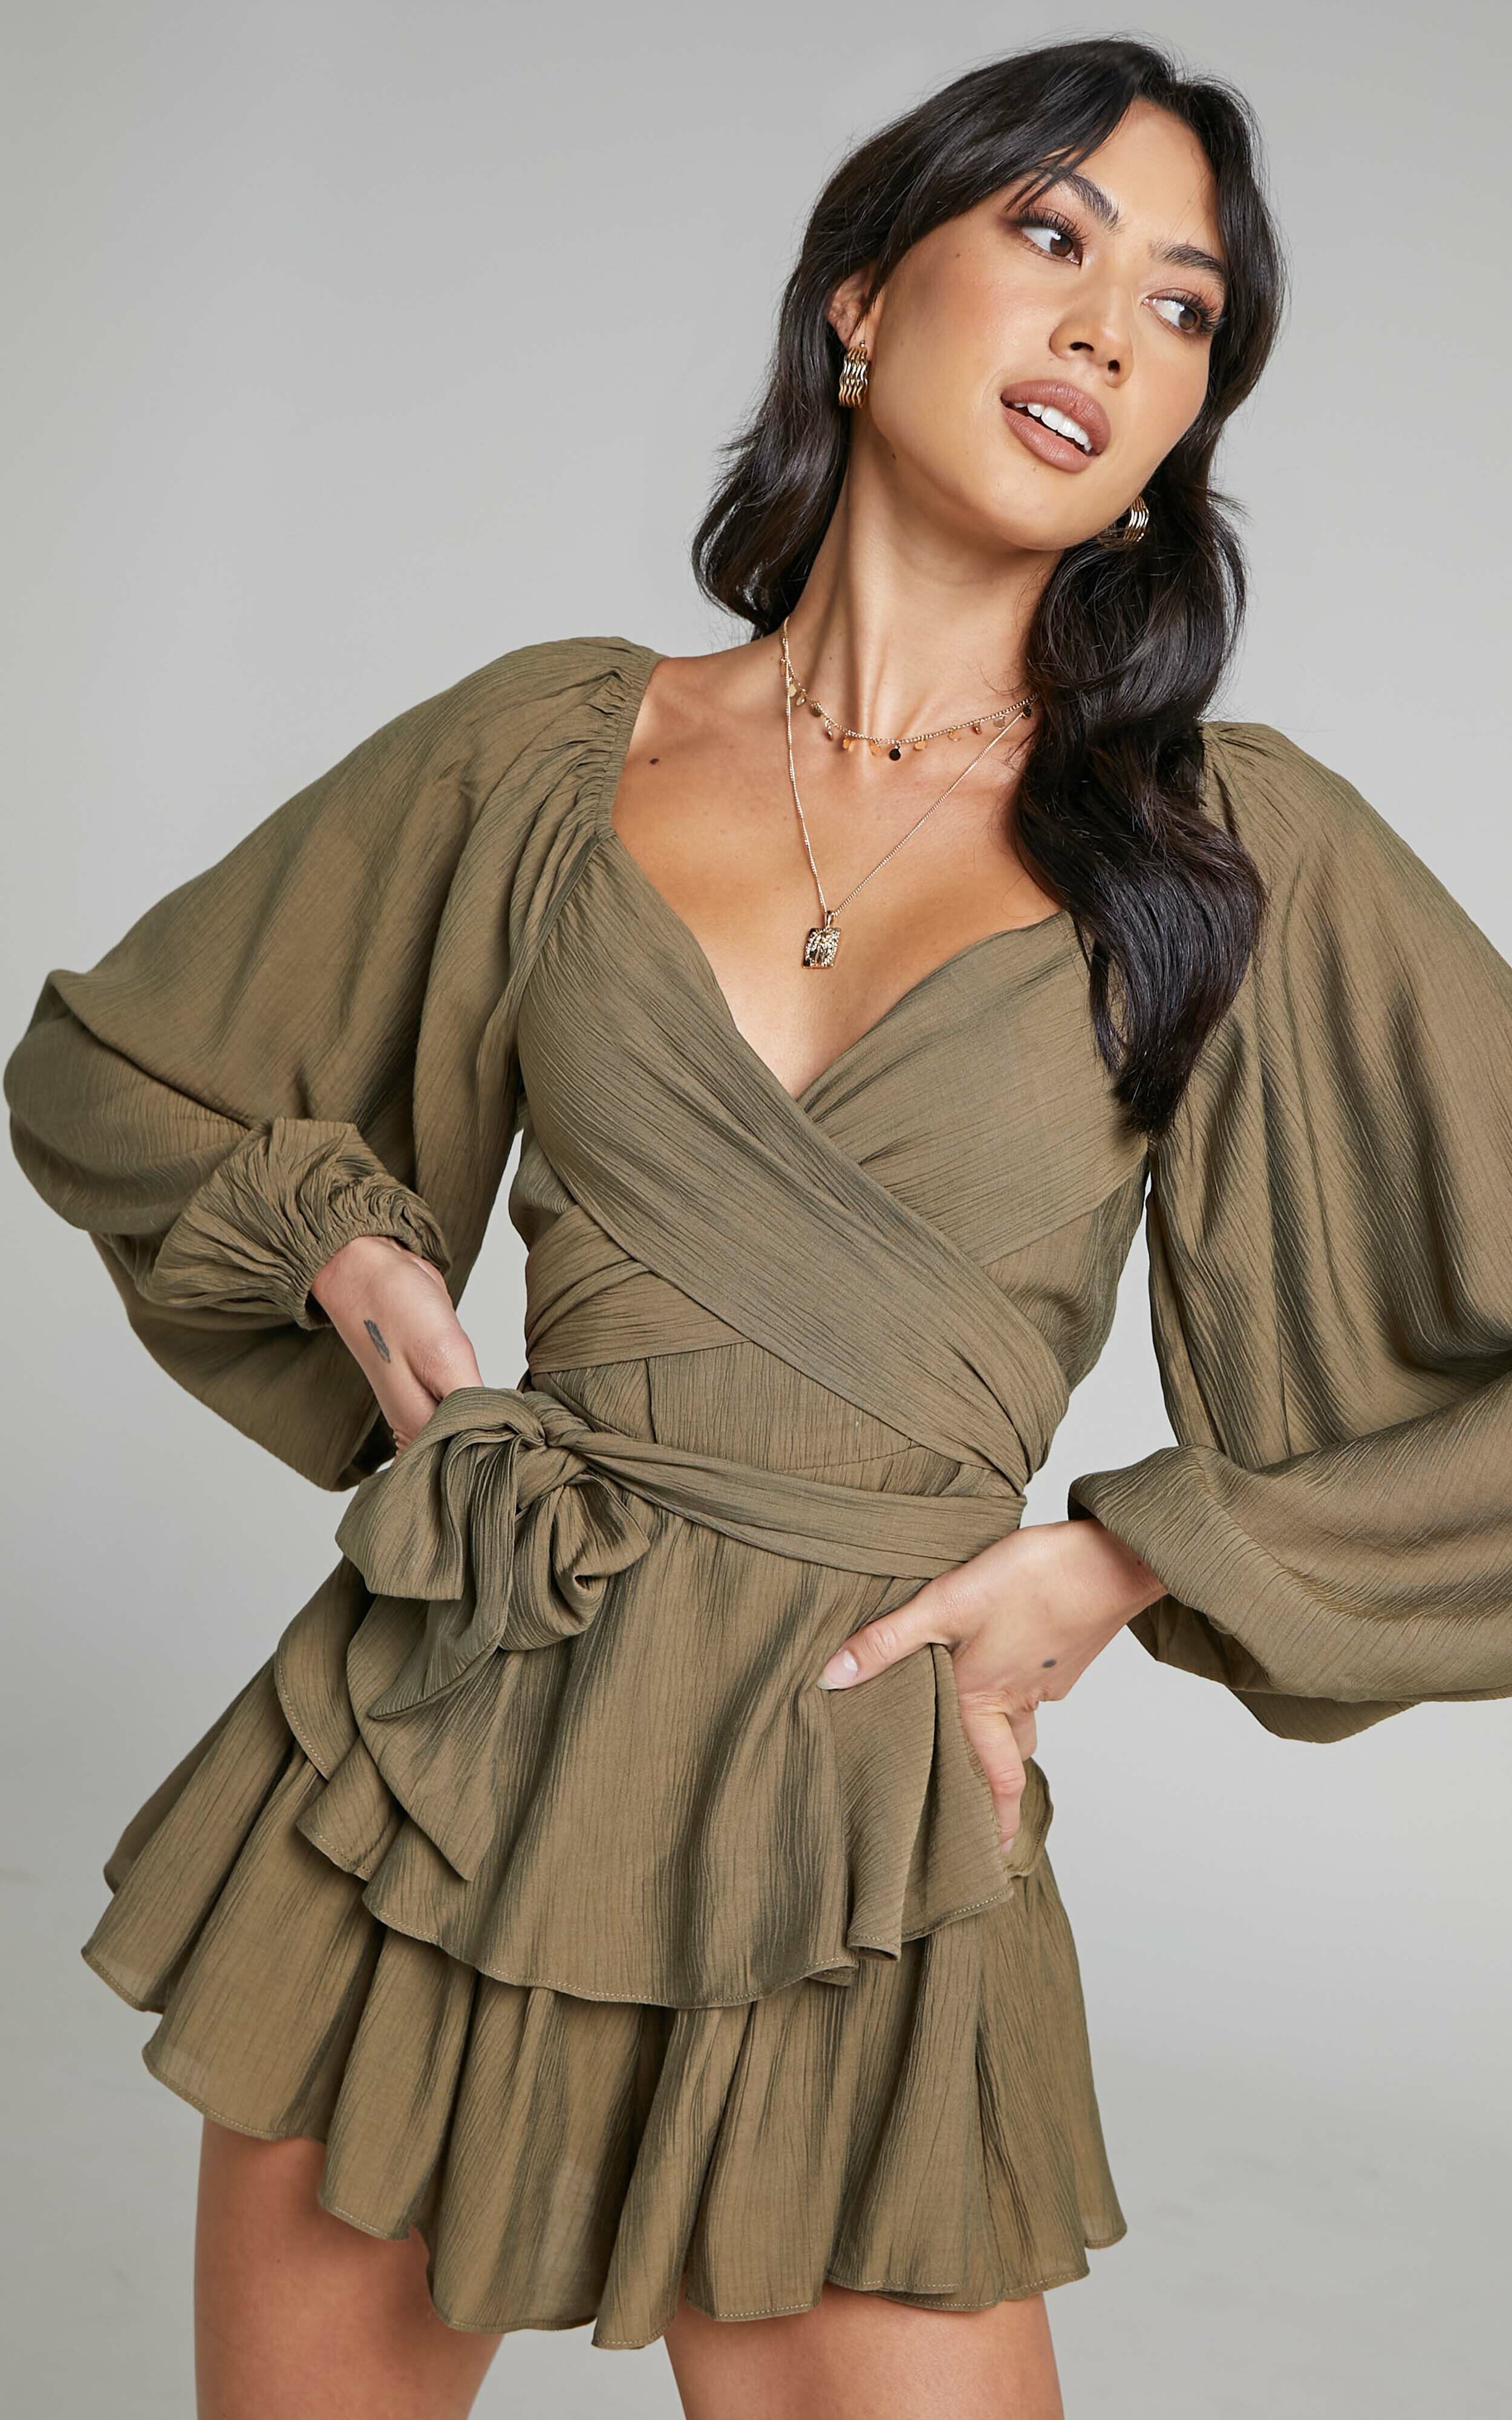 Florice Wrap Front Frill Playsuit in Khaki - 04, GRN6, super-hi-res image number null